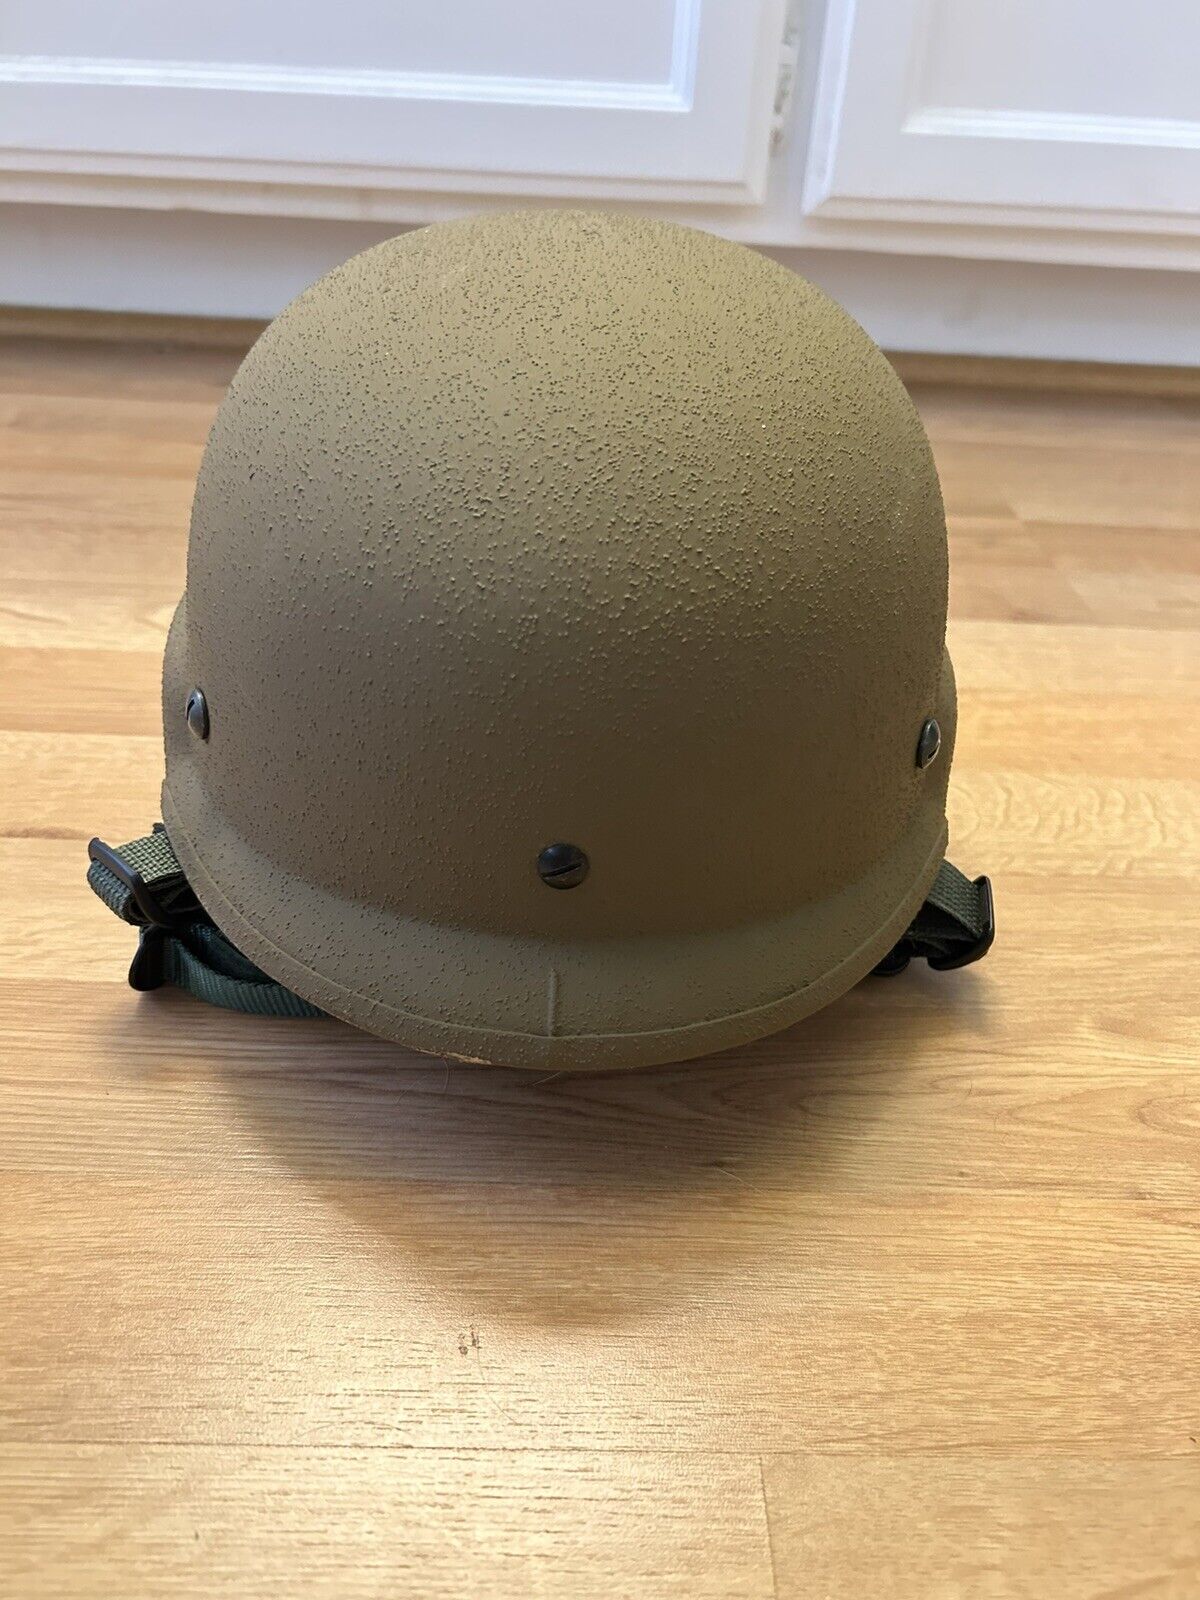 Large Coyote USMC LWH Lightweight helmet Comes With M81 Helmet Cover